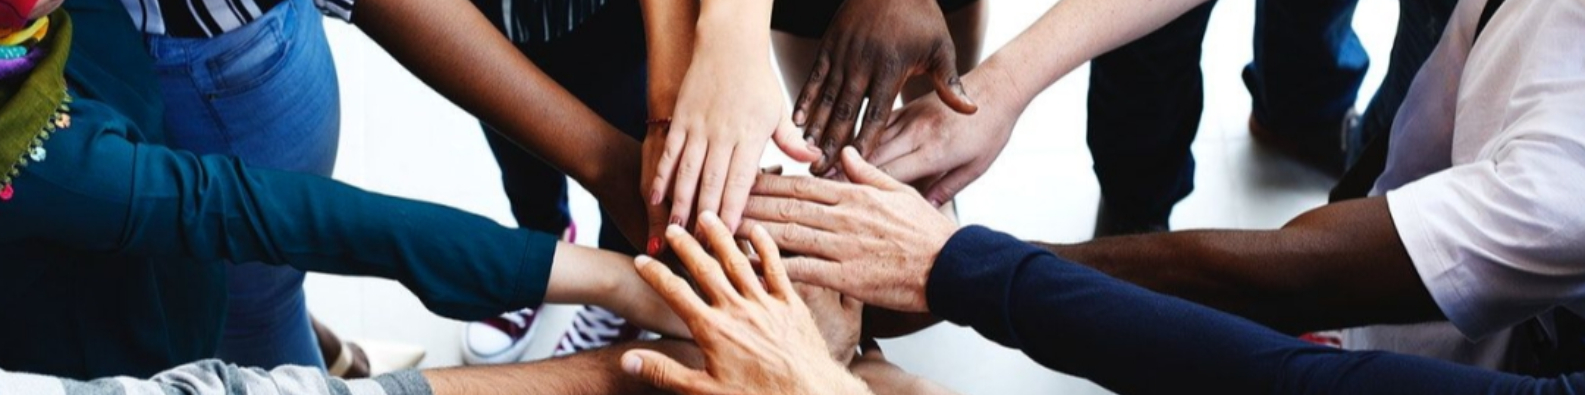 photo of multi-racial hands together in the center